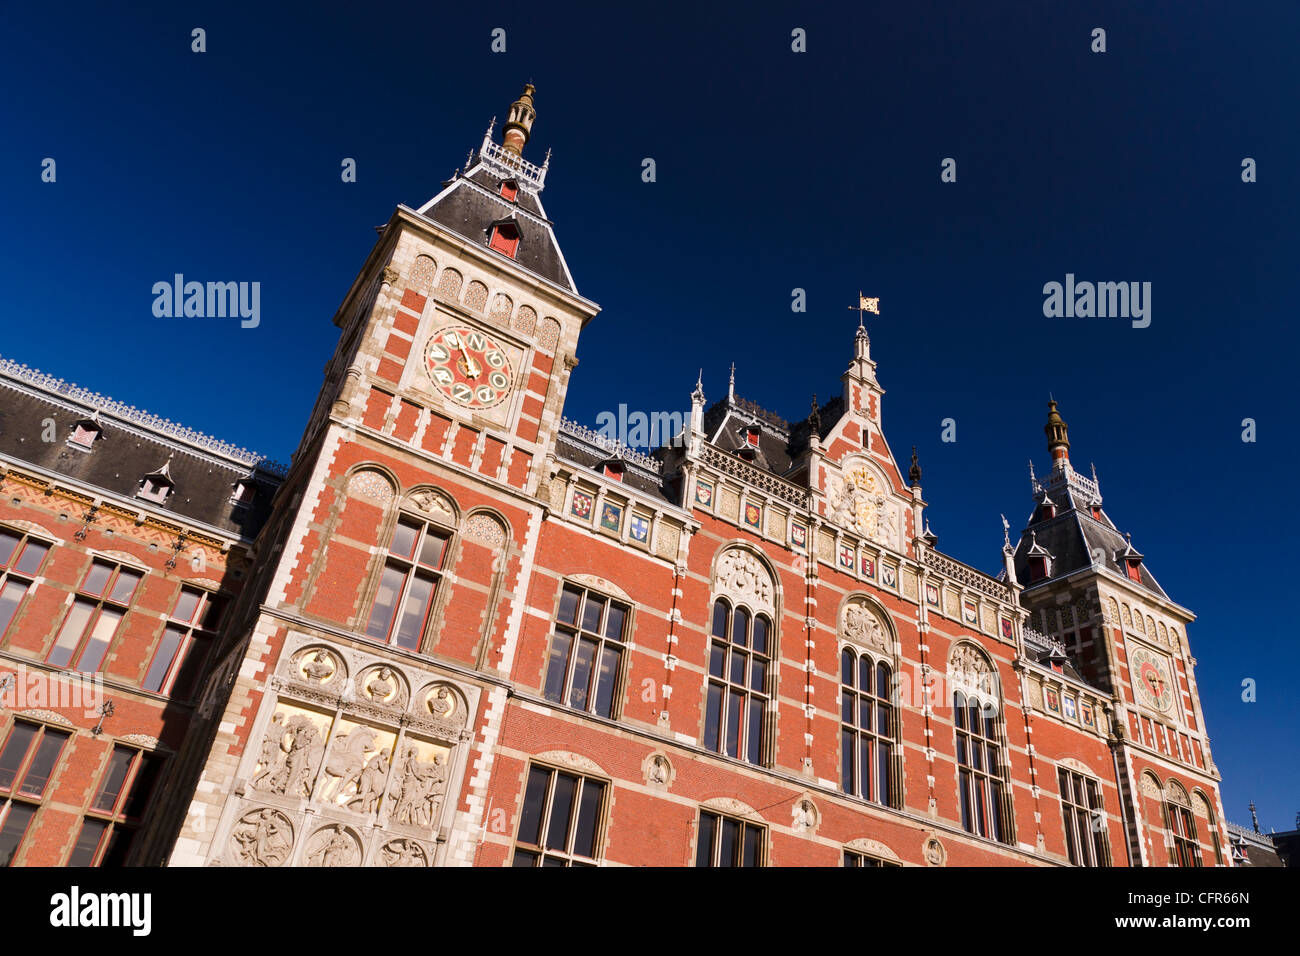 Amsterdam Centraal Station, central train station in Amsterdam, Netherlands. Stock Photo